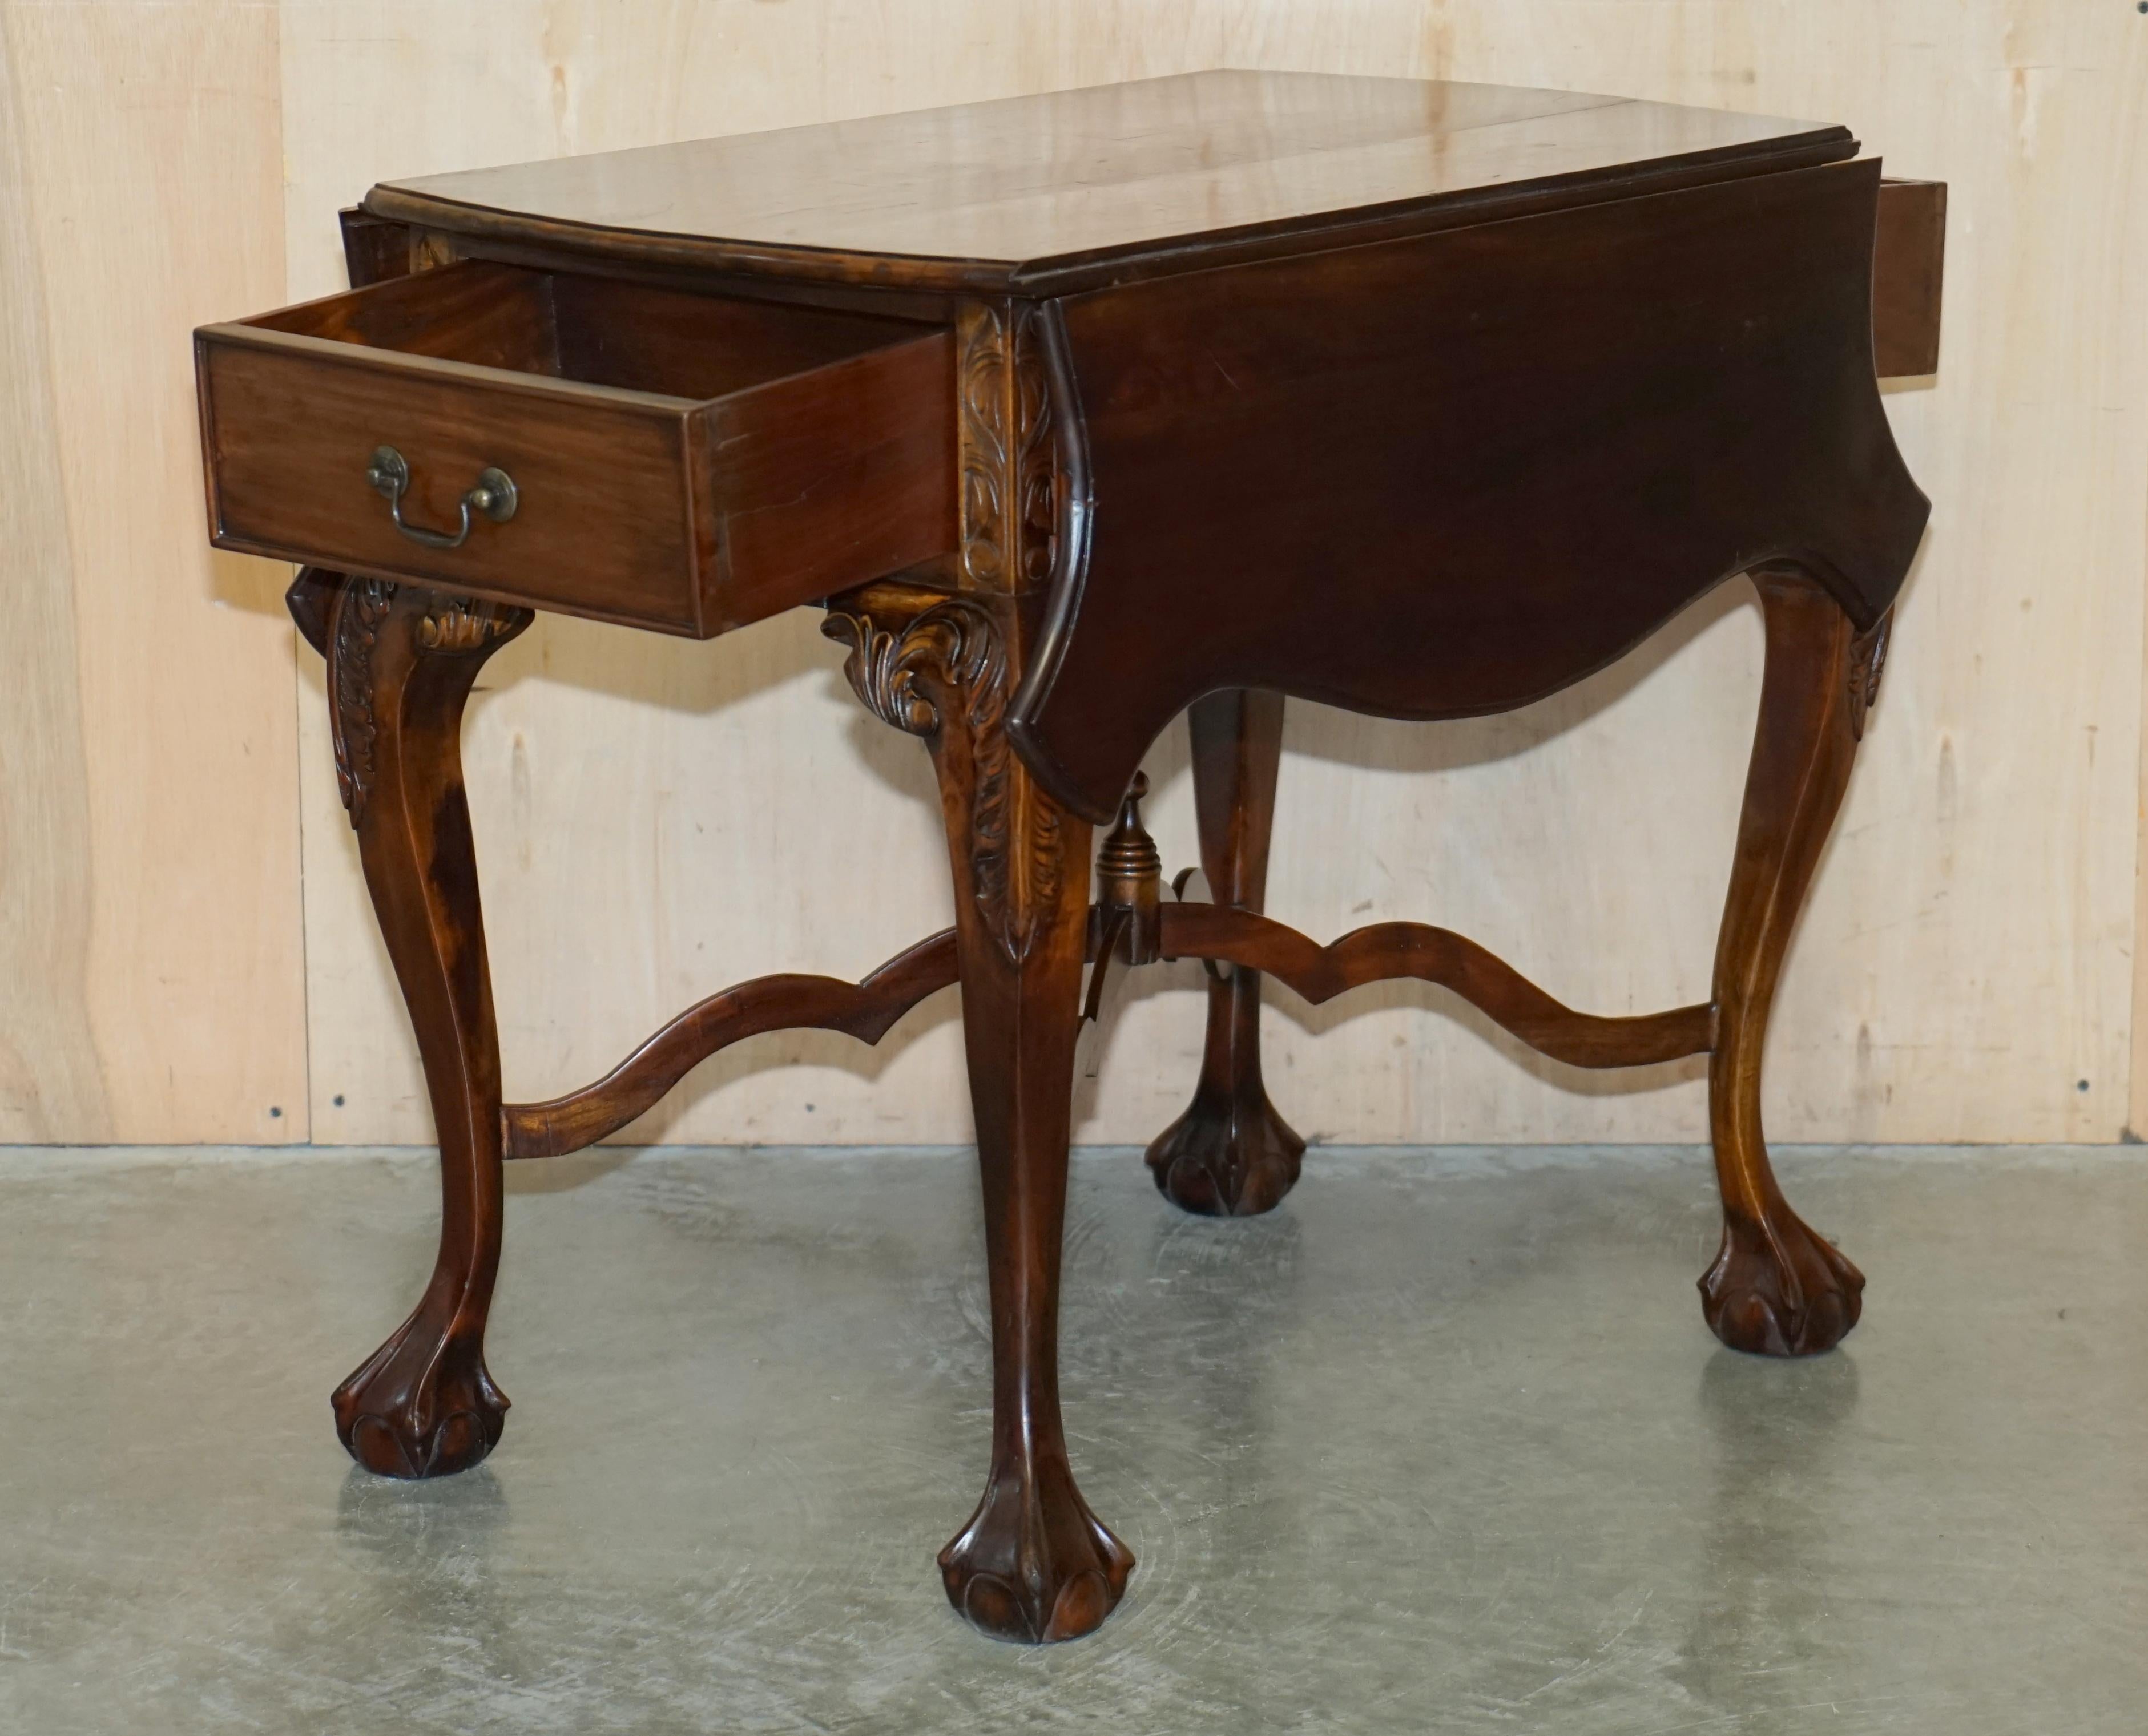 EXQUISITE THOMAS CHIPPENDALE STYLE CLAW & BALL FEET EXTENDiNG CHESS BOARD TABLE For Sale 9